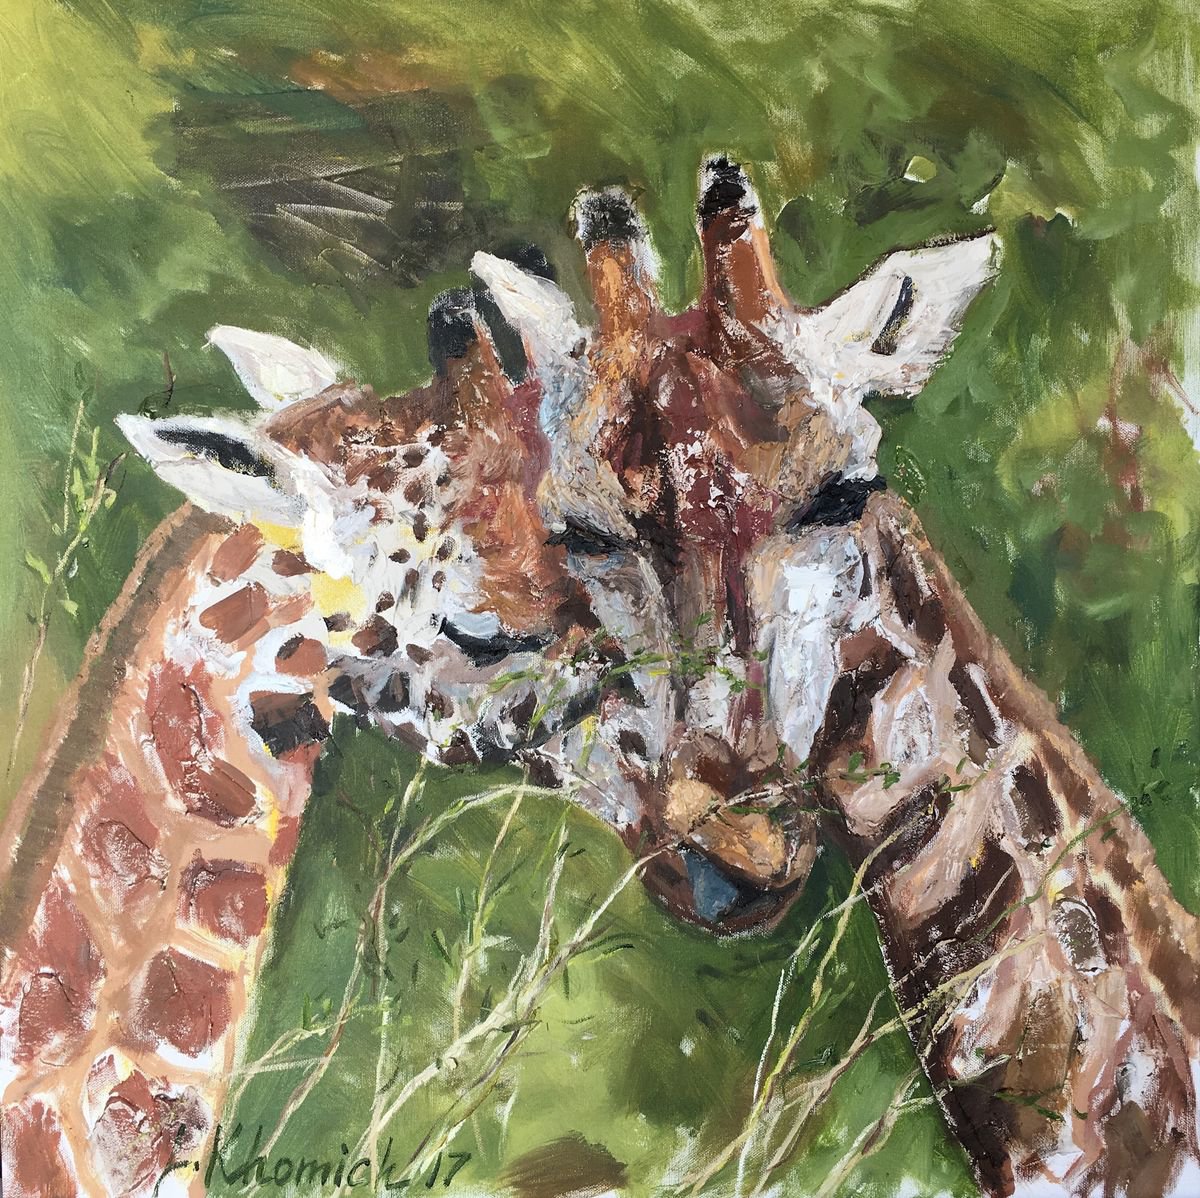 Animal Lovers - Giraffes Impression Painting Gift Idea by Leo Khomich